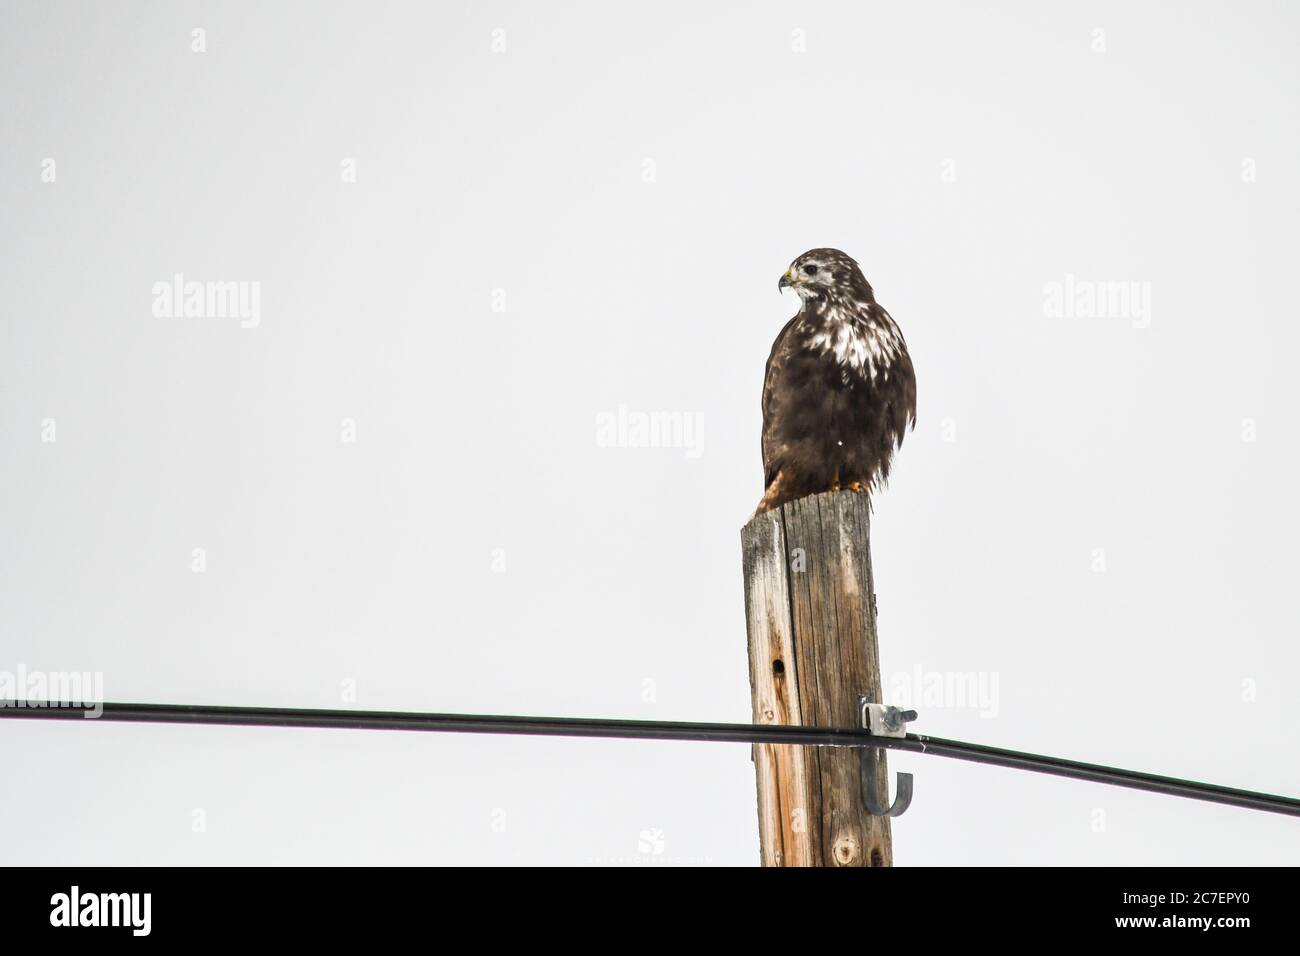 red-tailed hawk perched on post Stock Photo